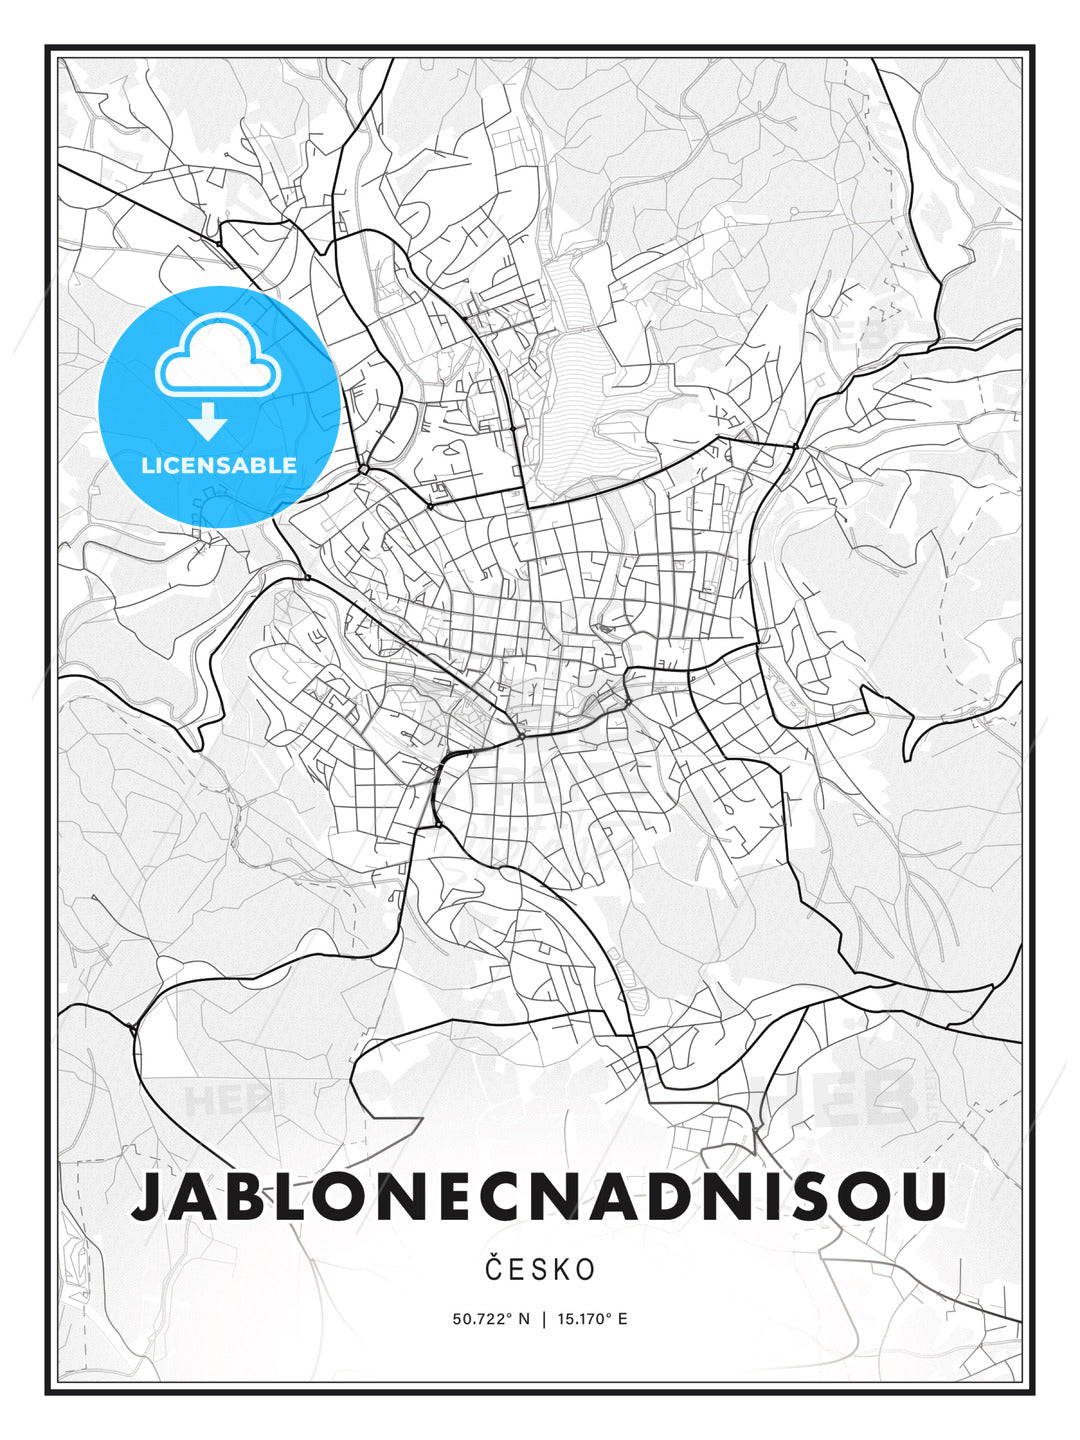 JABLONECNADNISOU / Jablonec nad Nisou, Czechia, Modern Print Template in Various Formats - HEBSTREITS Sketches